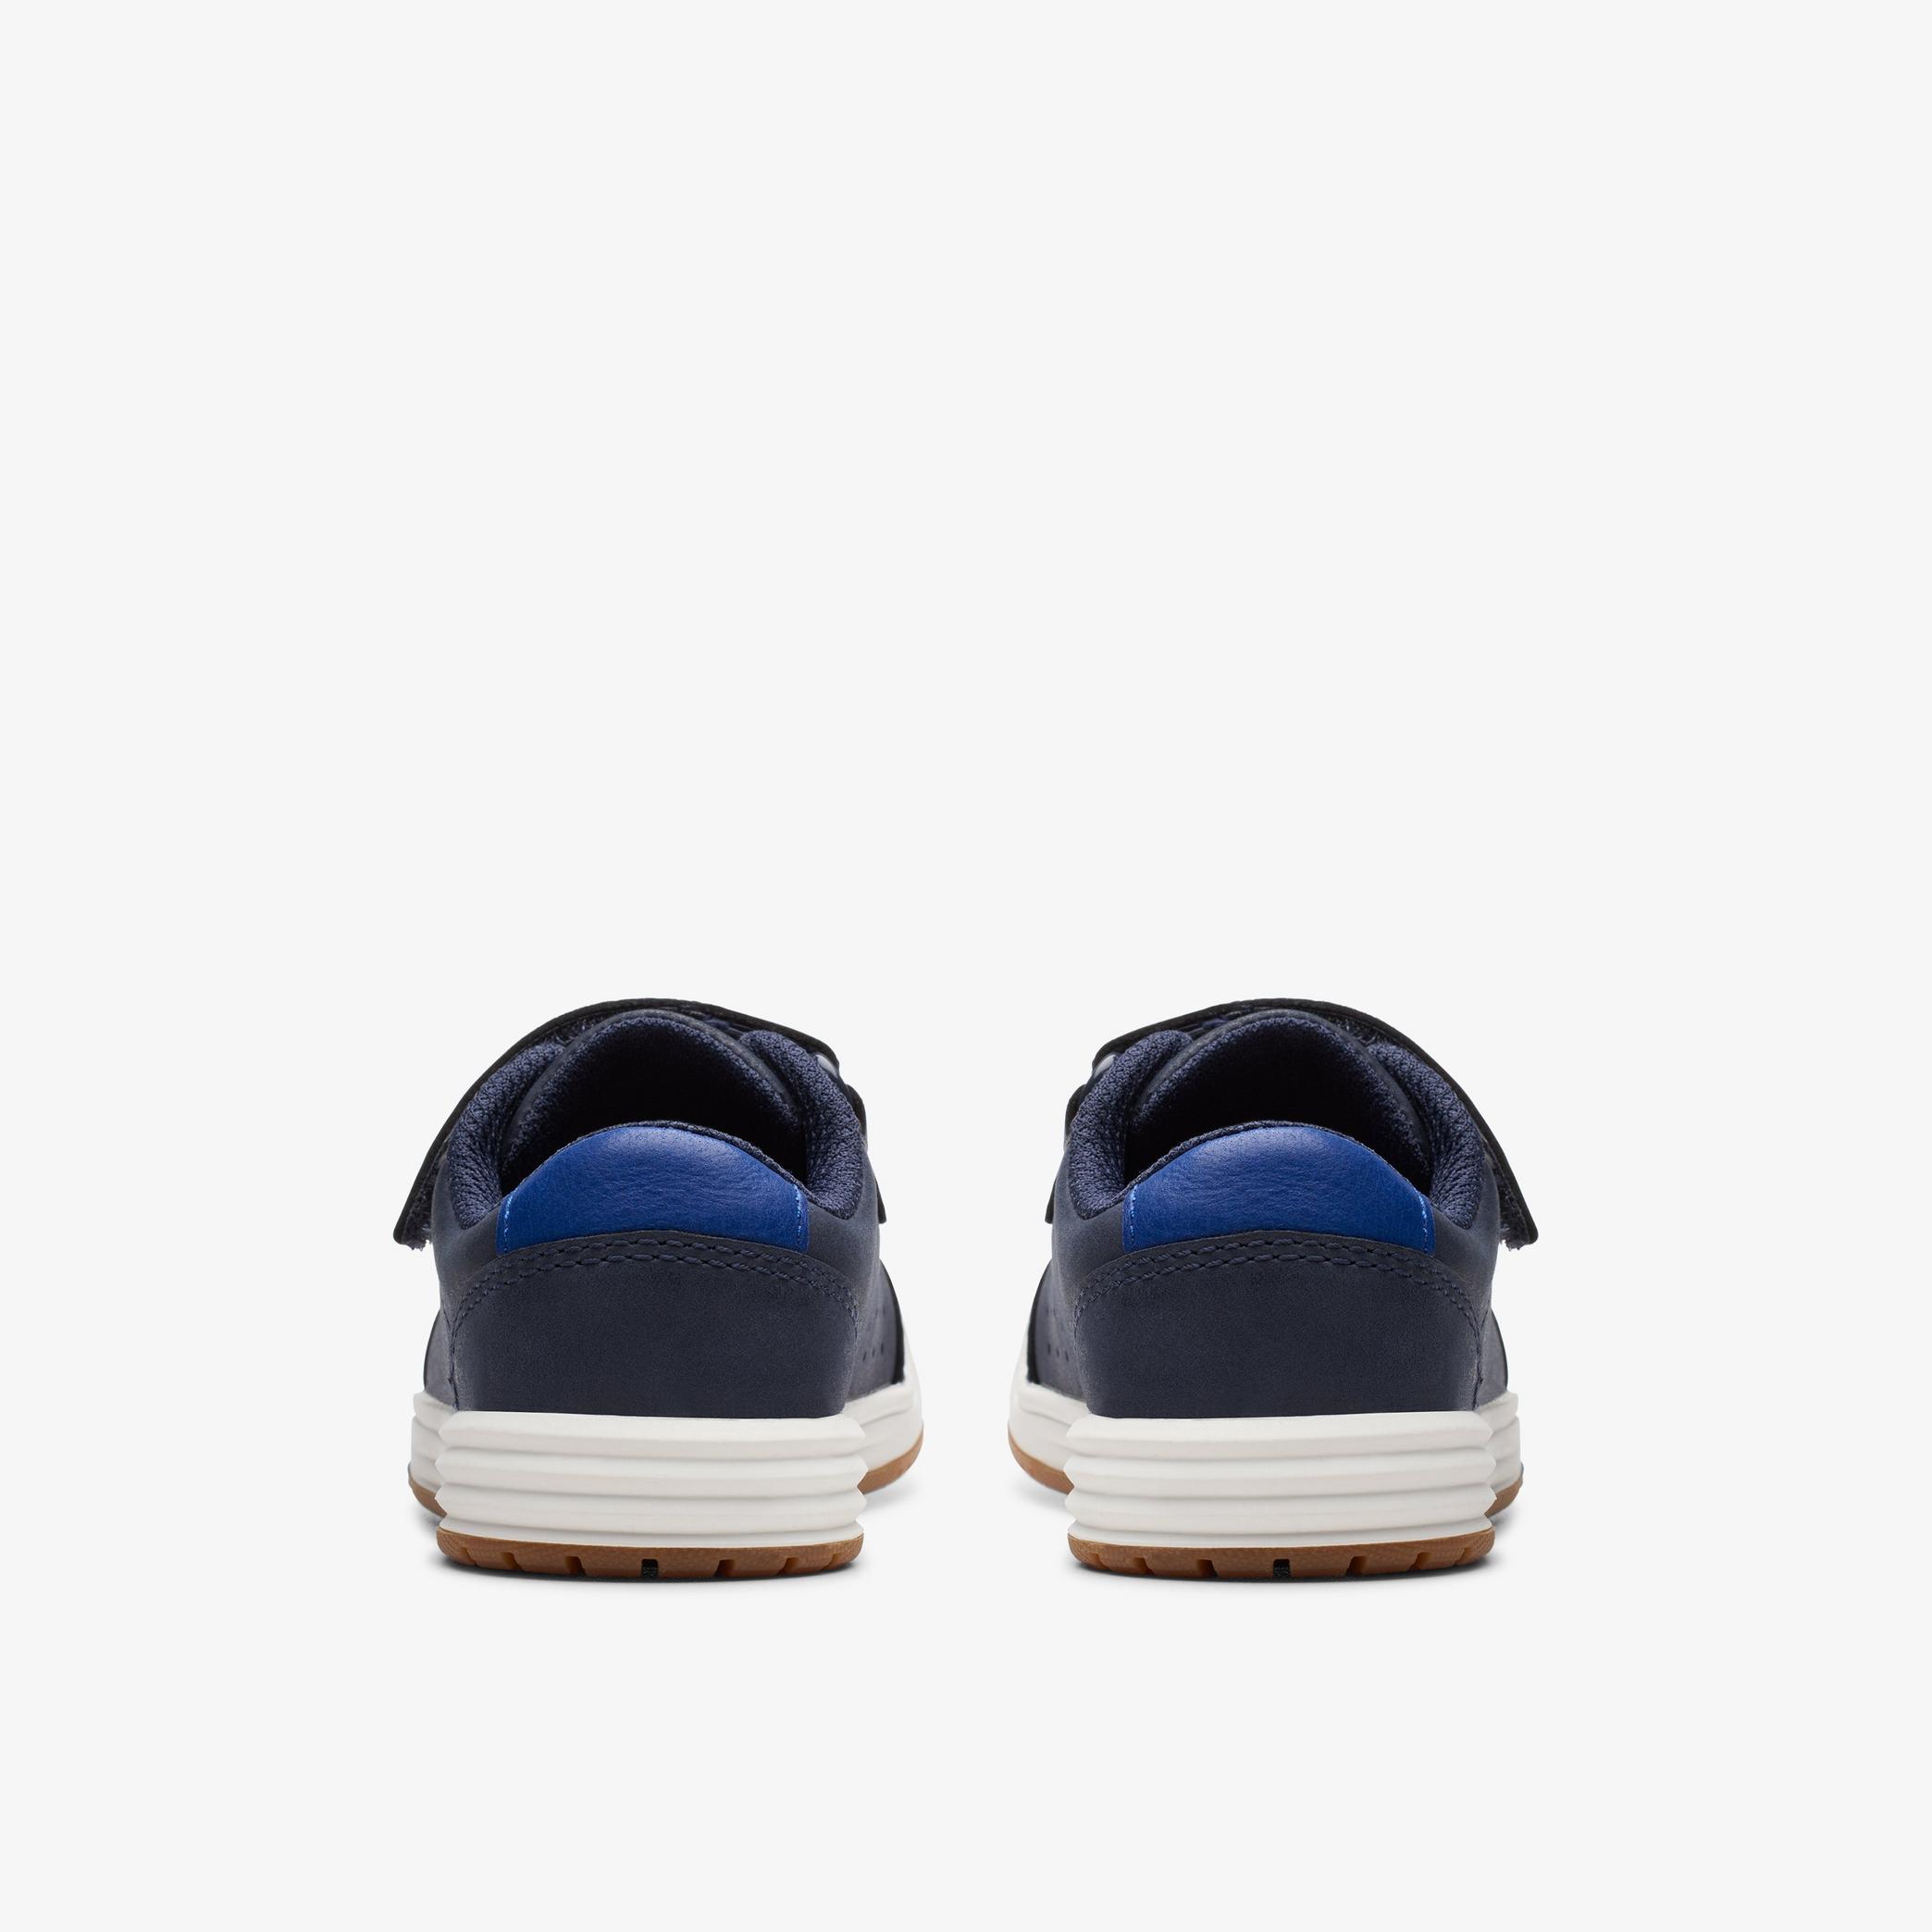 Urban Solo Toddler Navy Trainers, view 5 of 6